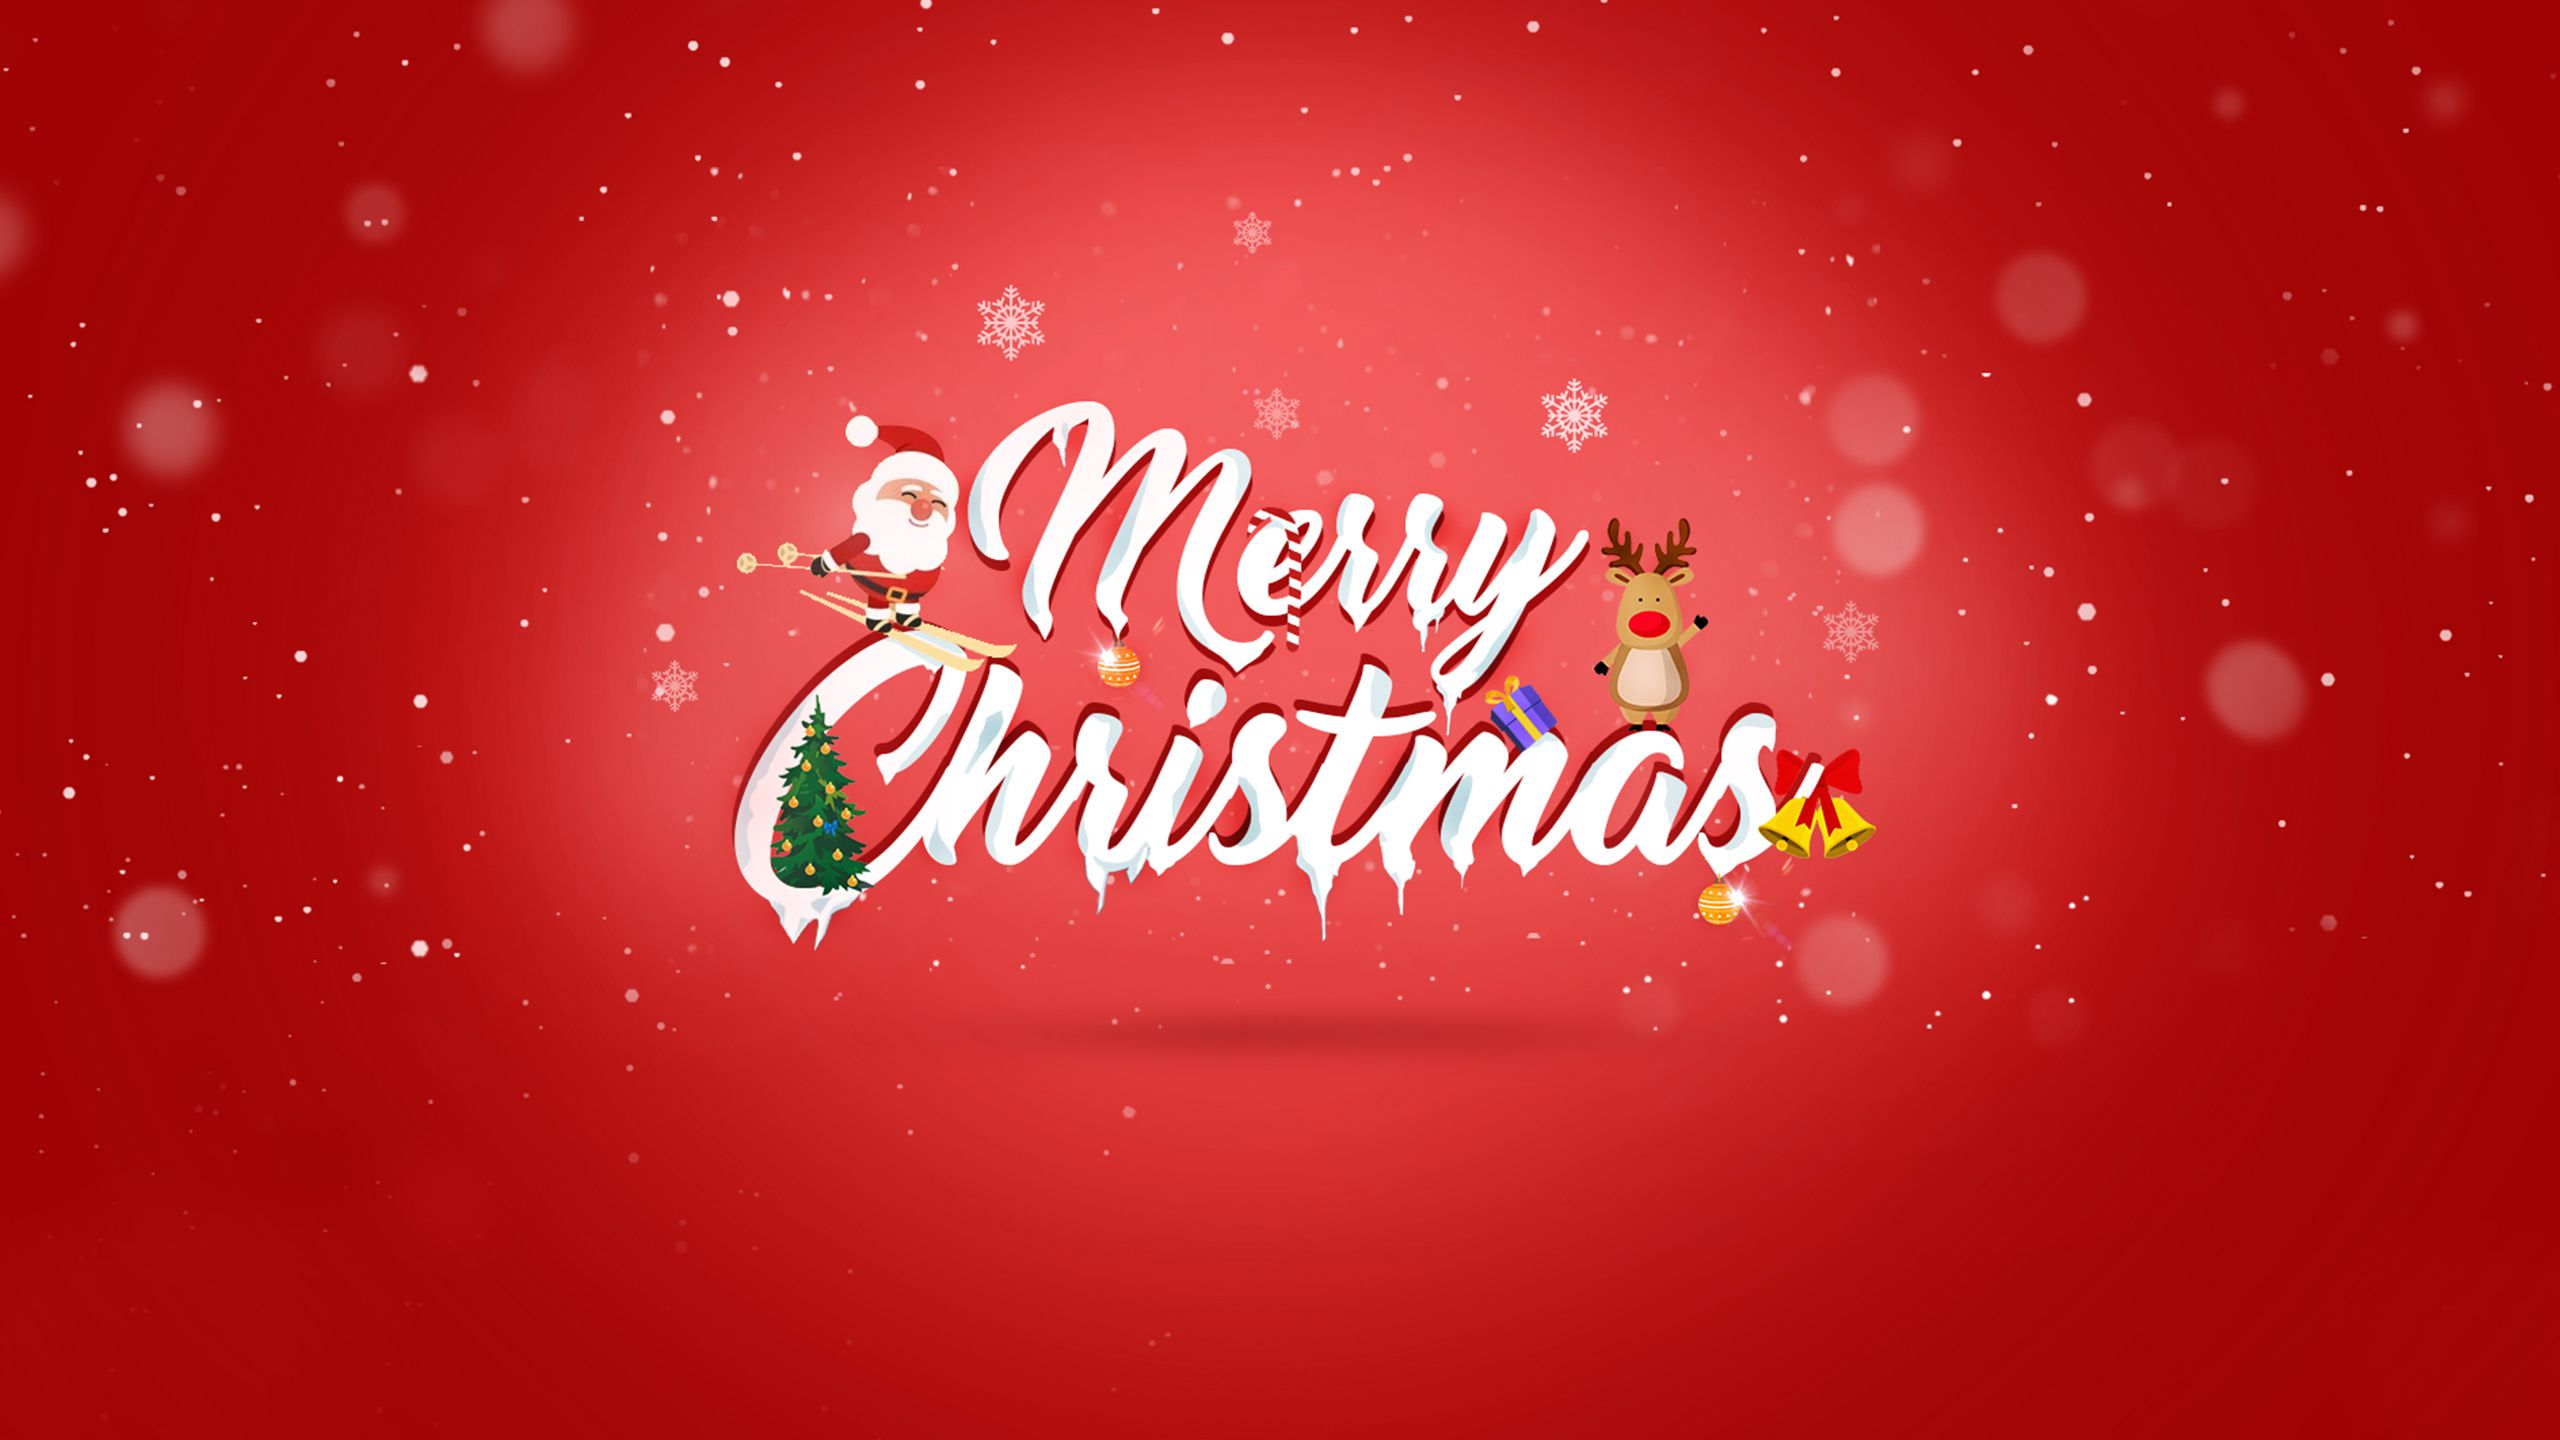 Free Download Merry Christmas 2018 Wallpaper [2560x1440] For Your Desktop, Mobile & Tablet. Explore Merry Christmas 2018 2019 Wallpaper. Merry Christmas 2018 2019 Wallpaper, Merry Christmas 2019 Wallpaper, Merry Christmas 2019 HD Wallpaper